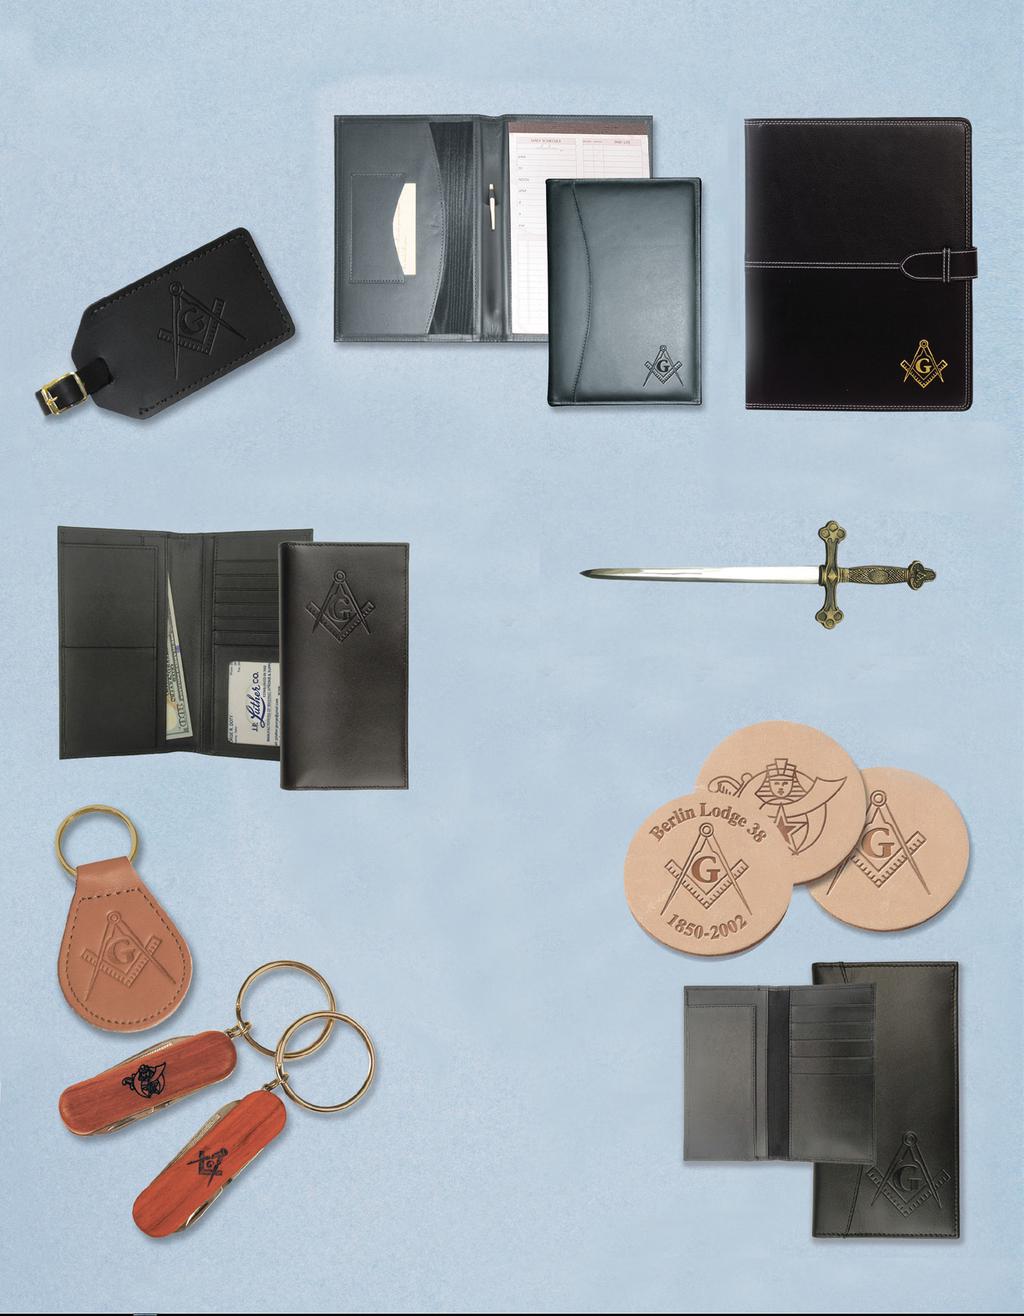 Leather Luggage Tag Semi Secure tag satisfies airport I.D. requirements. Embossed emblem. No. E-702 $9.00 Compact Leather Portfolio Features 5 x 8 Pad, Pen slot and Business Card holder.